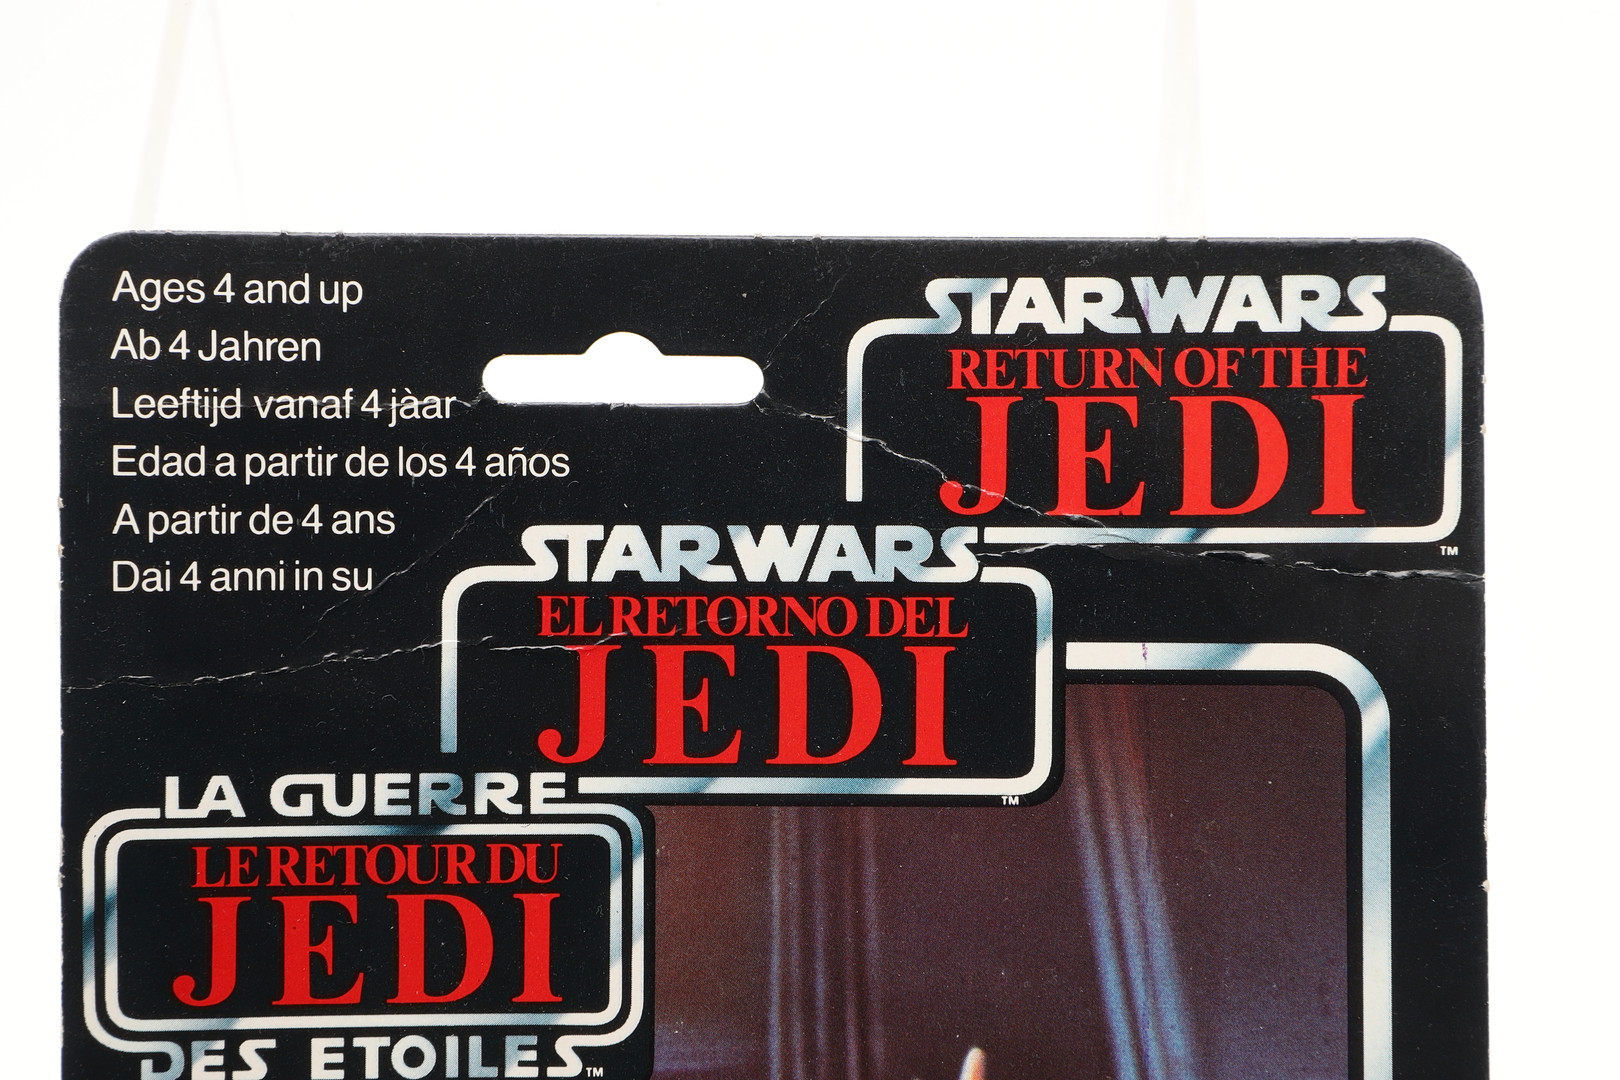 STAR WARS CARDED FIGURES - RETURN OF THE JEDI. - Image 13 of 32